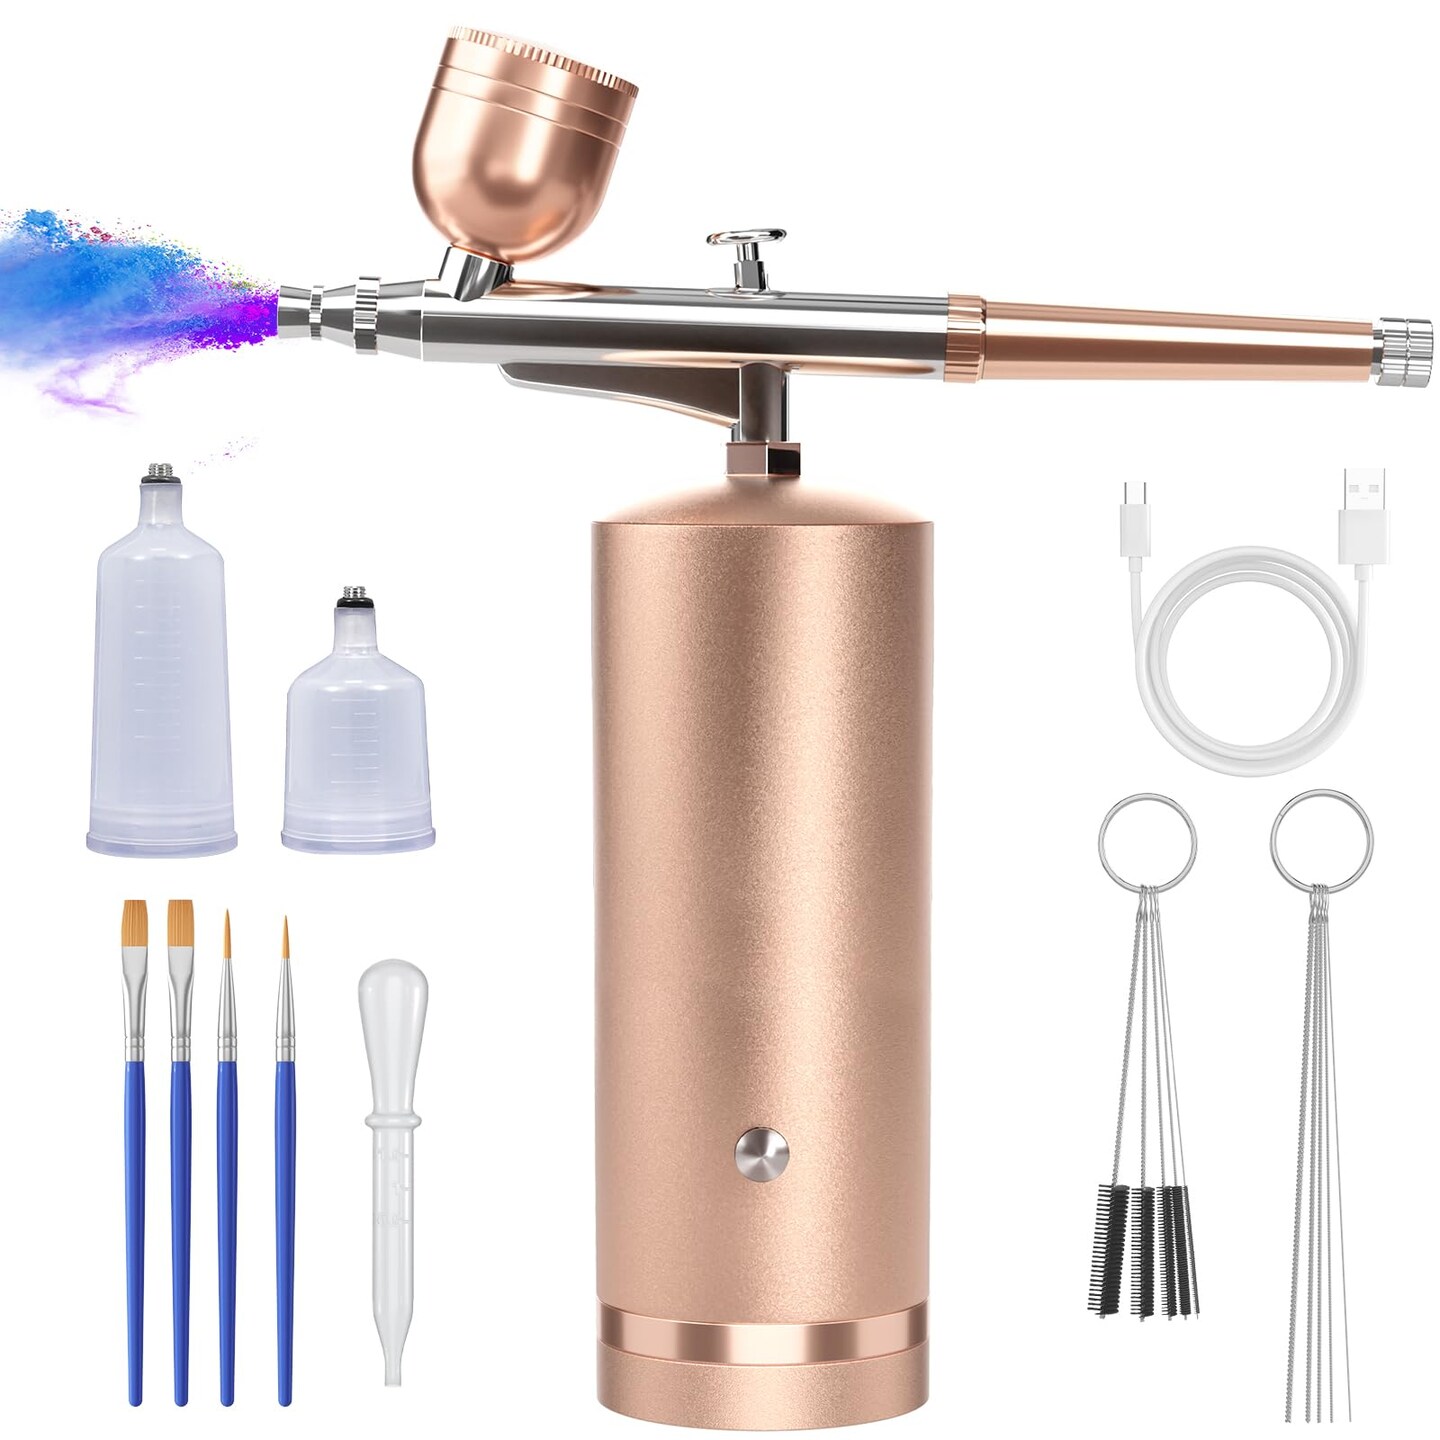 Airbrush Kit With Compressor - 48PSI Rechargeable Cordless Non-Clogging High-Pressure Air Brush Set with 0.3mm Nozzle and Cleaning Brush Set for Nail Art, Makeup, Painting, Cake Decor